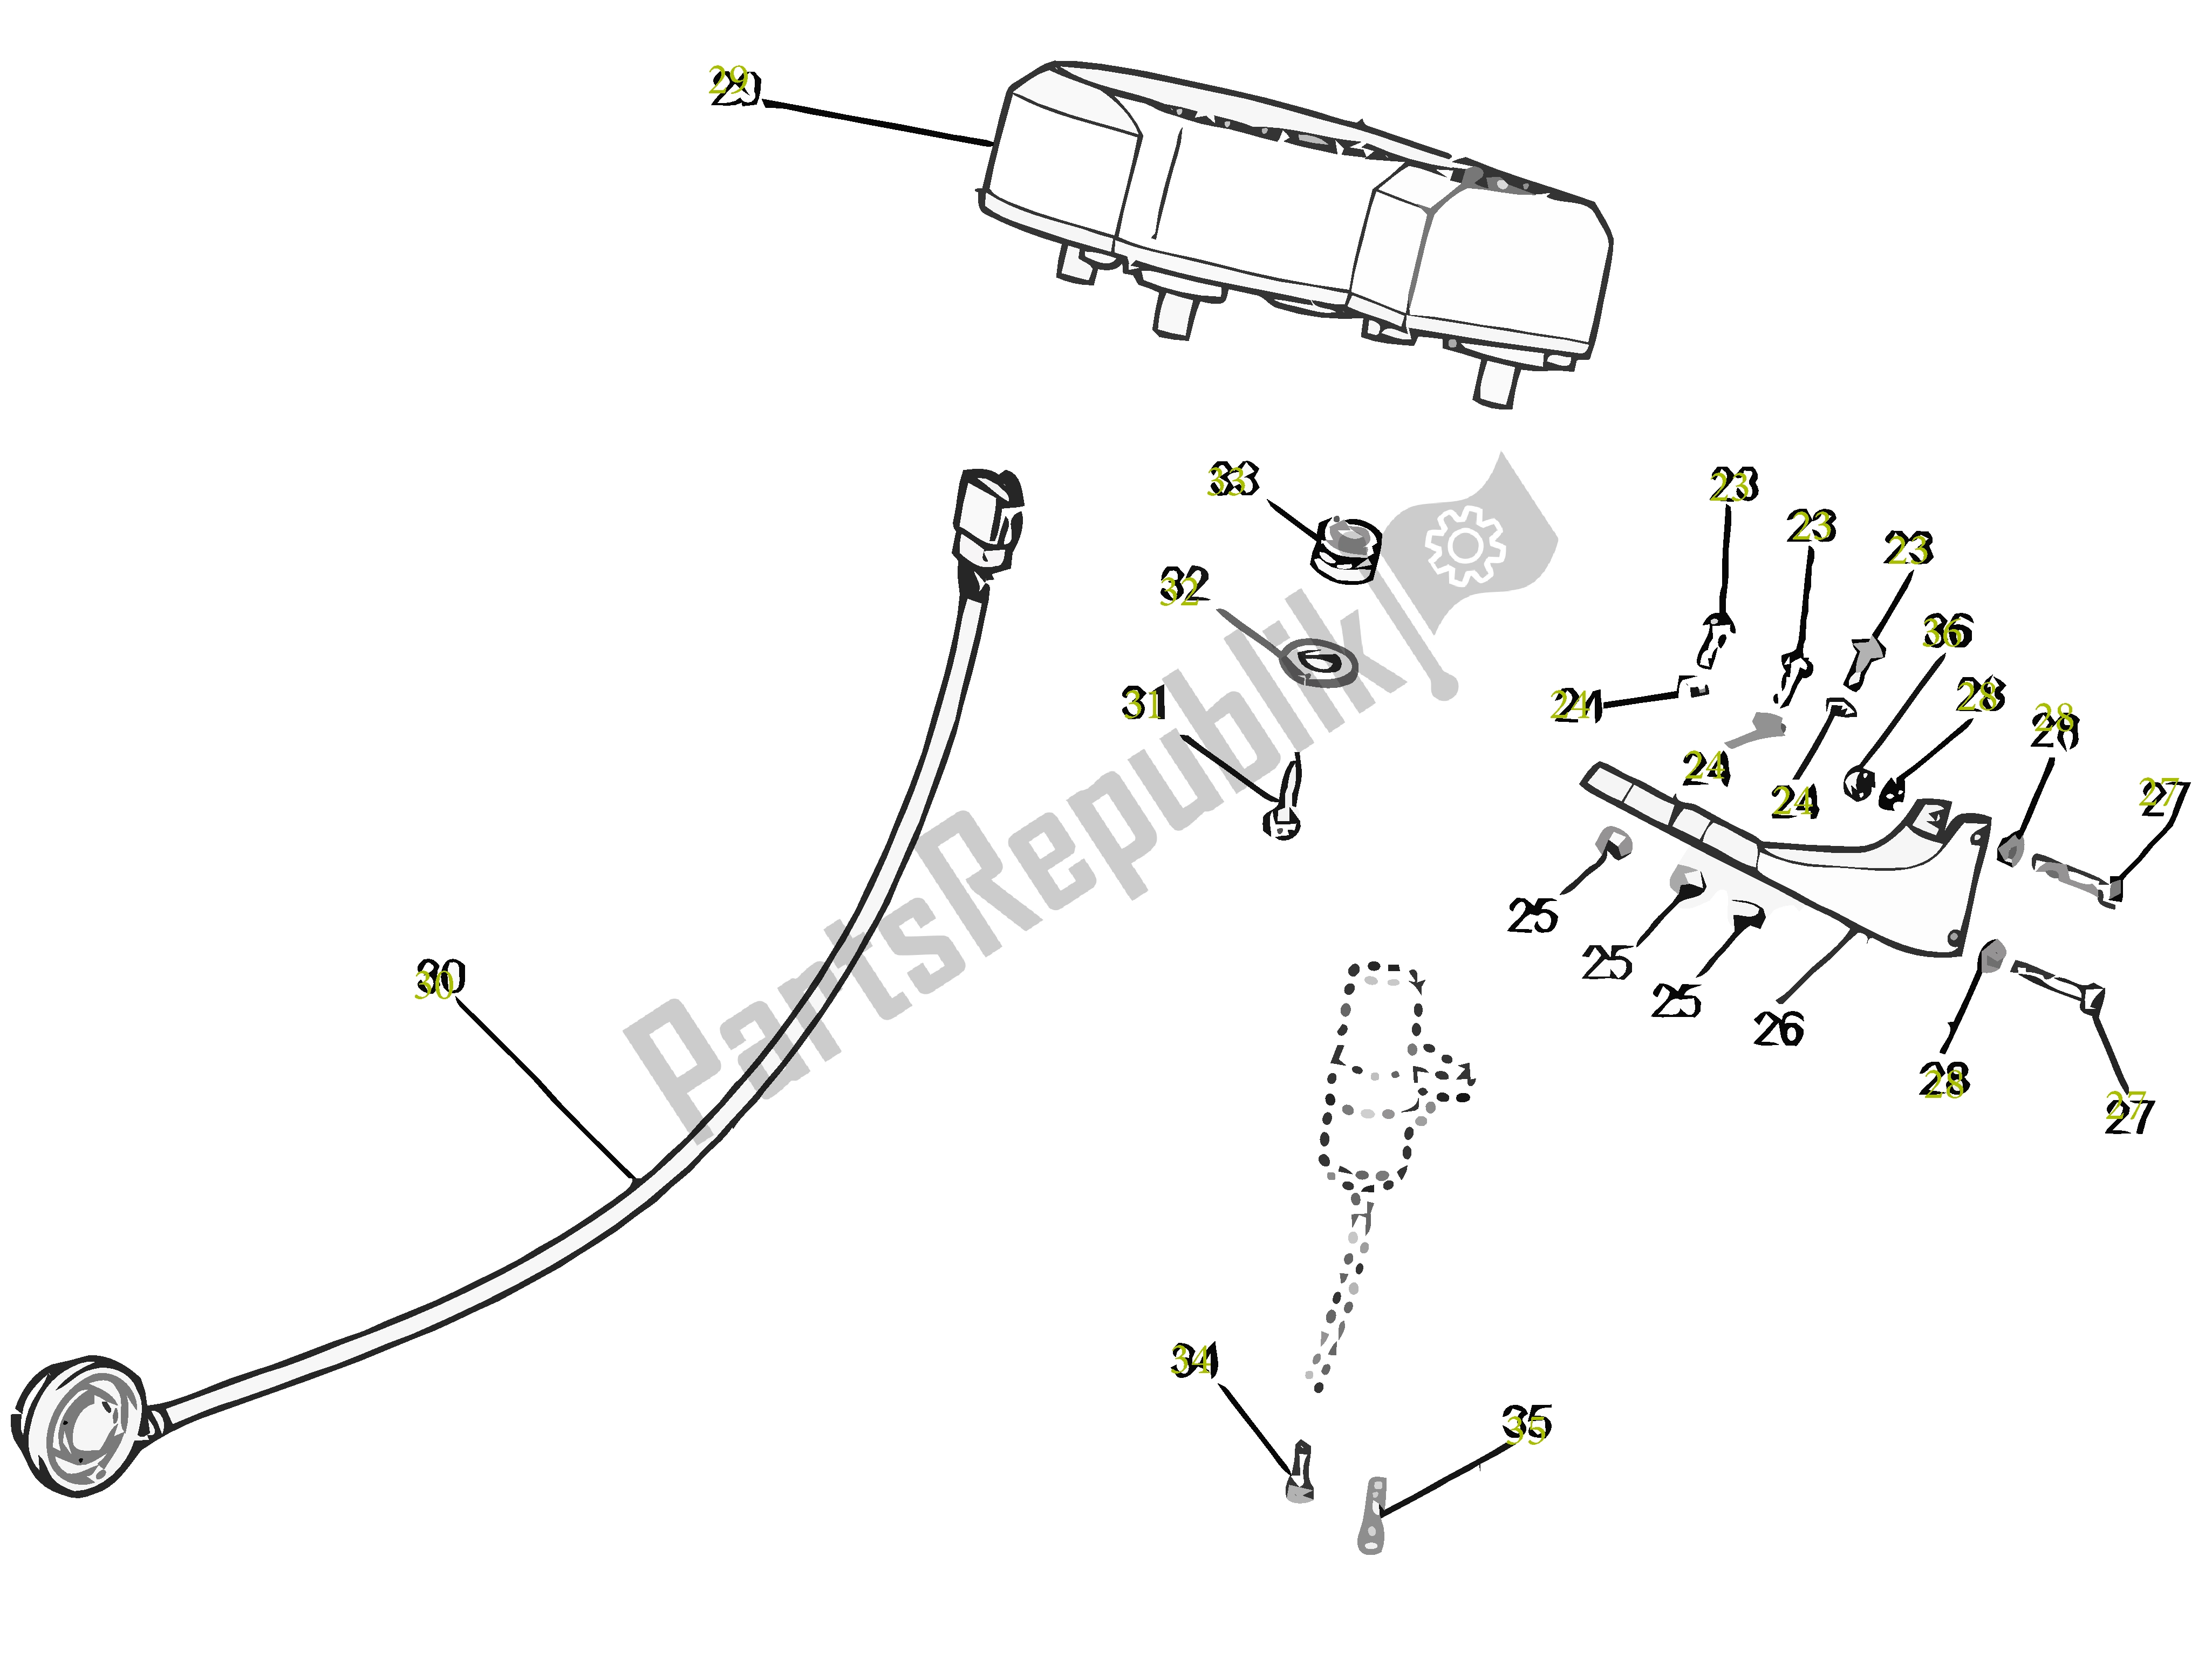 All parts for the Instrumentengroep - Kilomete of the Gilera SC 125 2007 - 2015